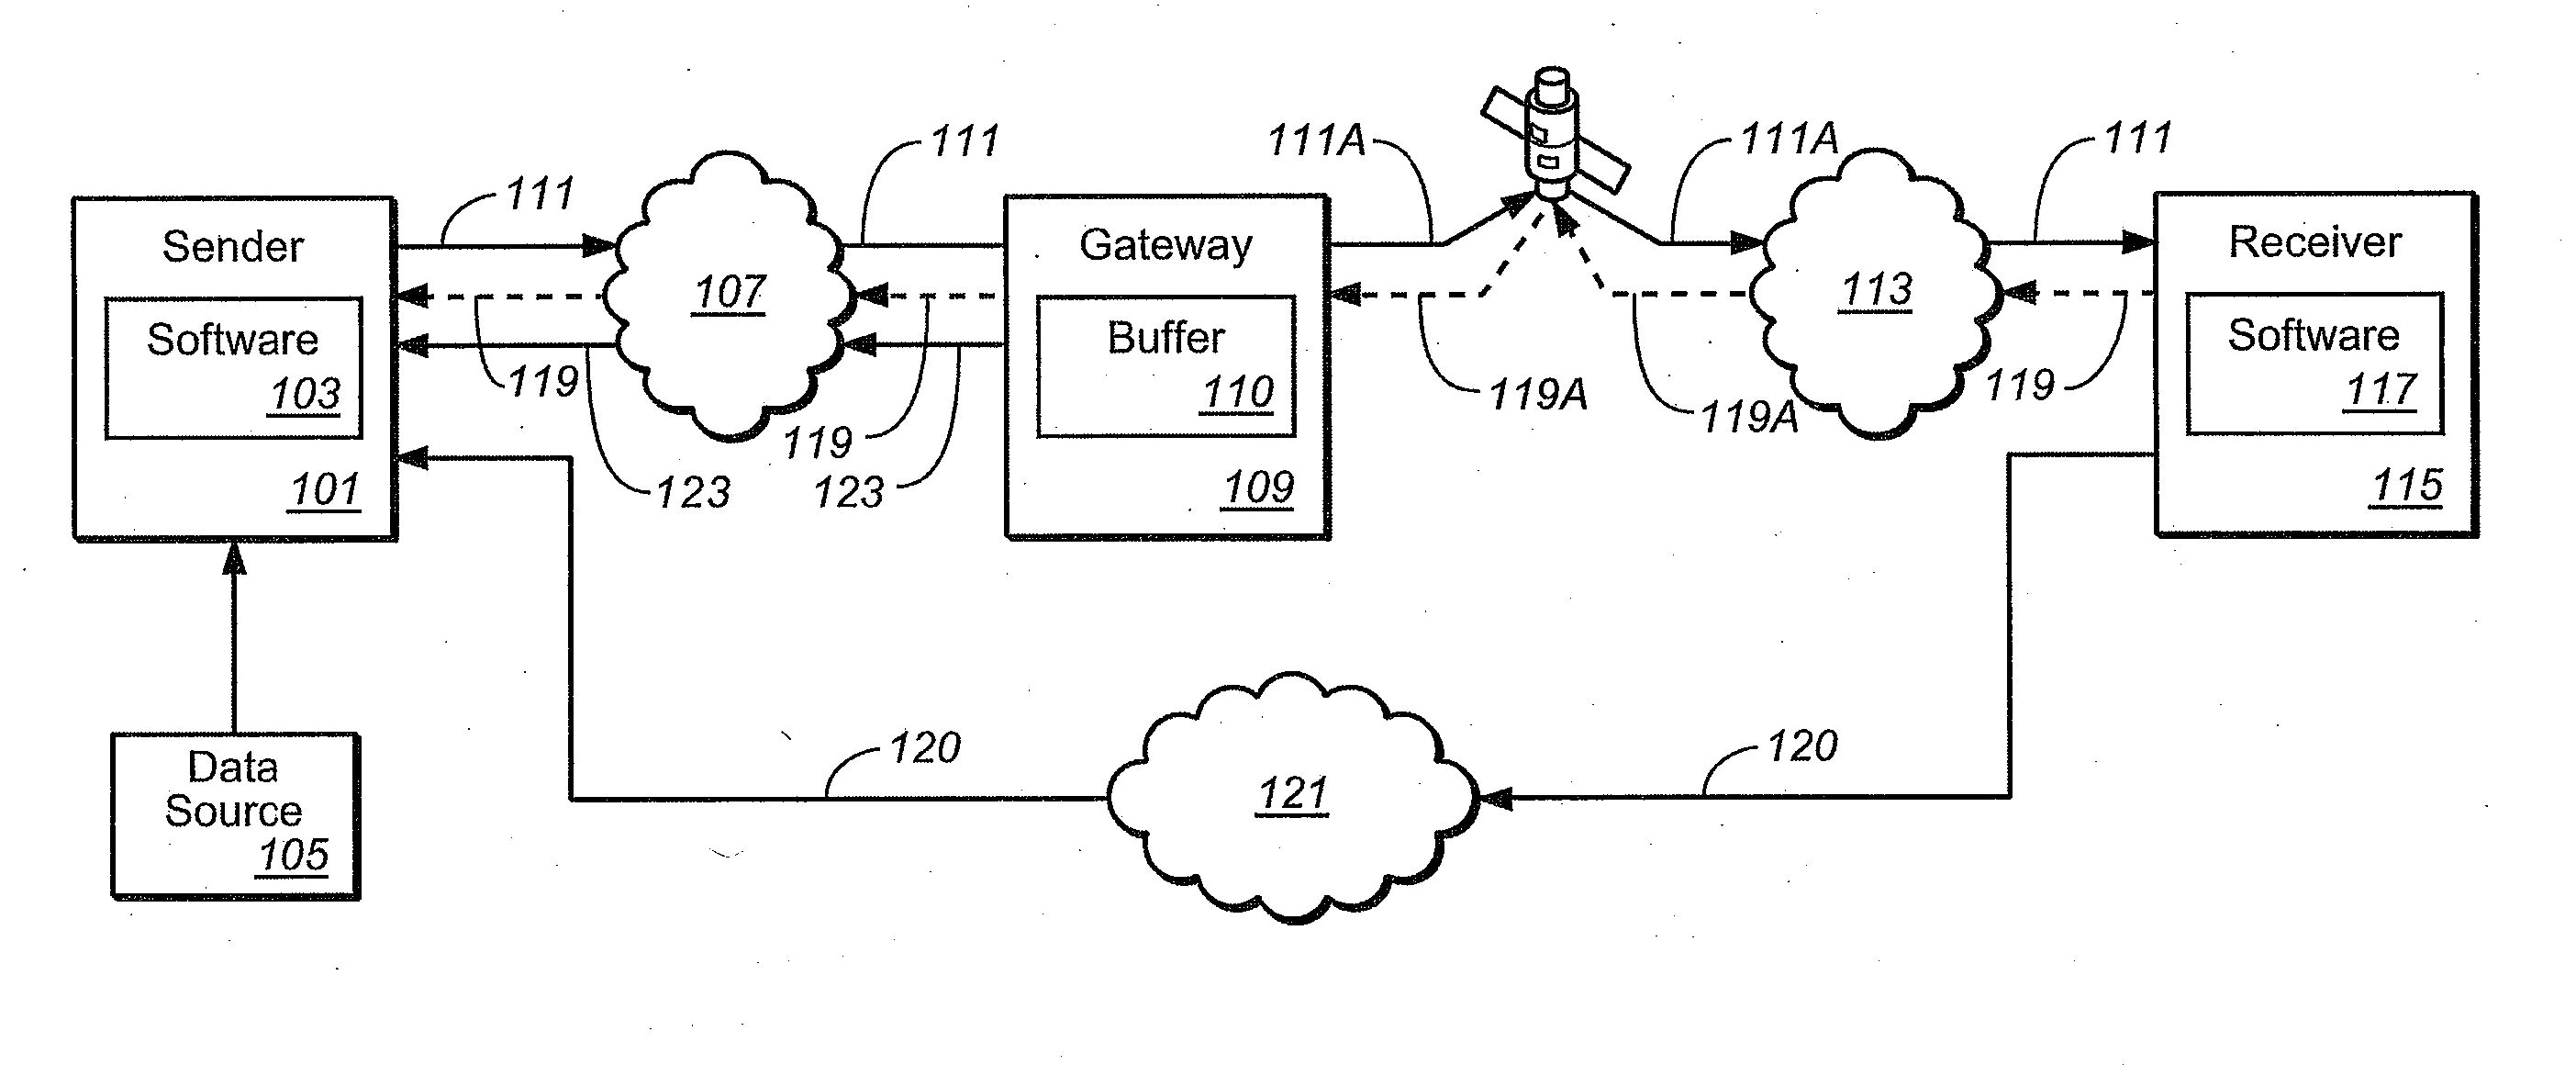 Data transmission system for networks with non-full-duplex or asymmetric transport